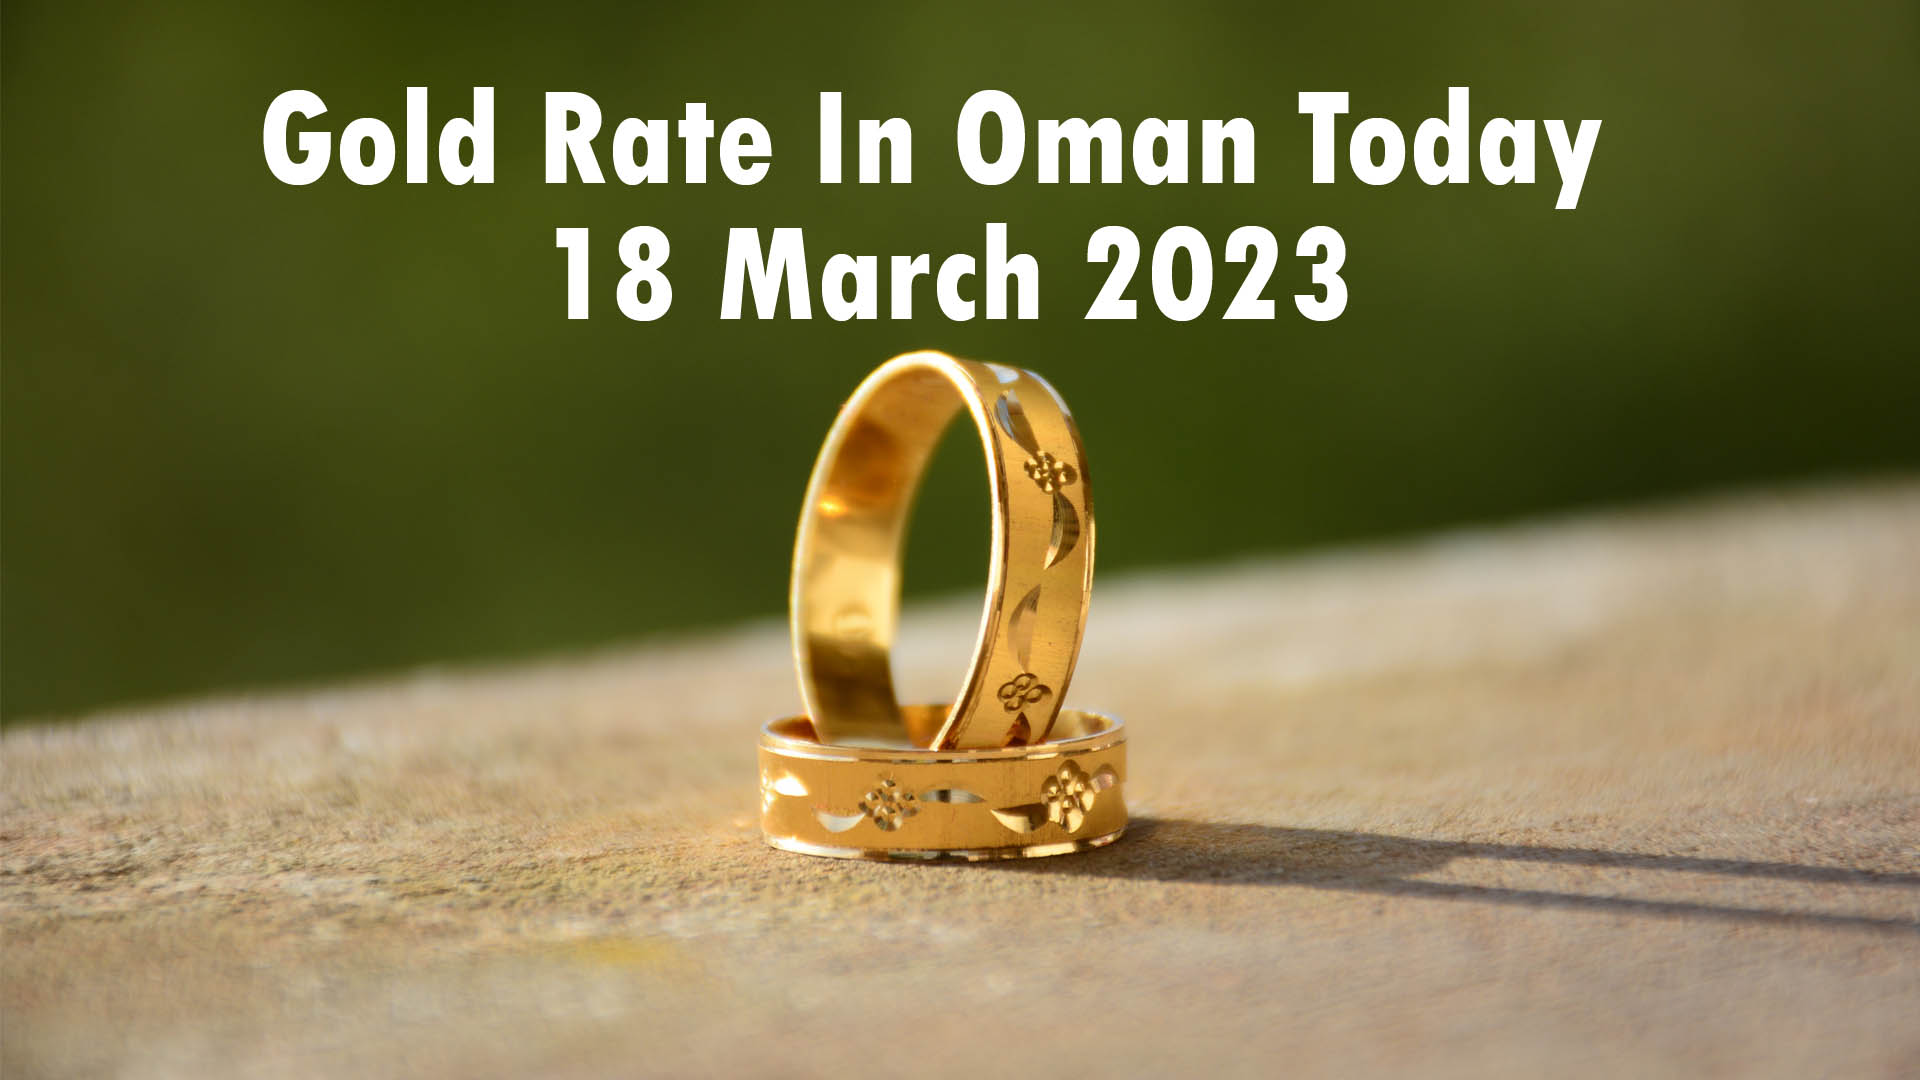 Gold Rate In Oman Today 18 March 2023